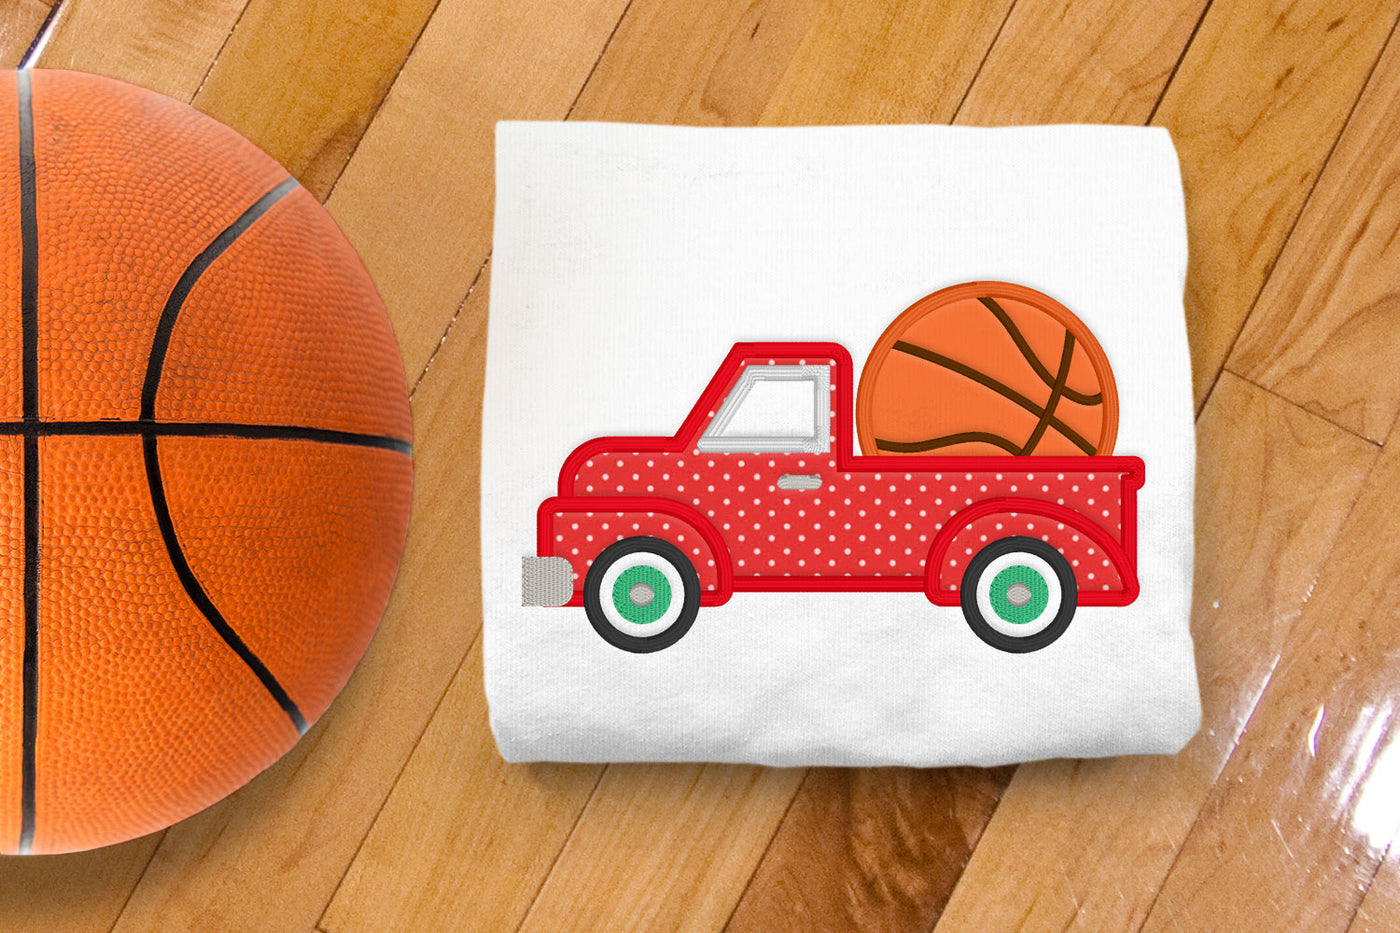 Vintage Truck with Basketball Applique Embroidery